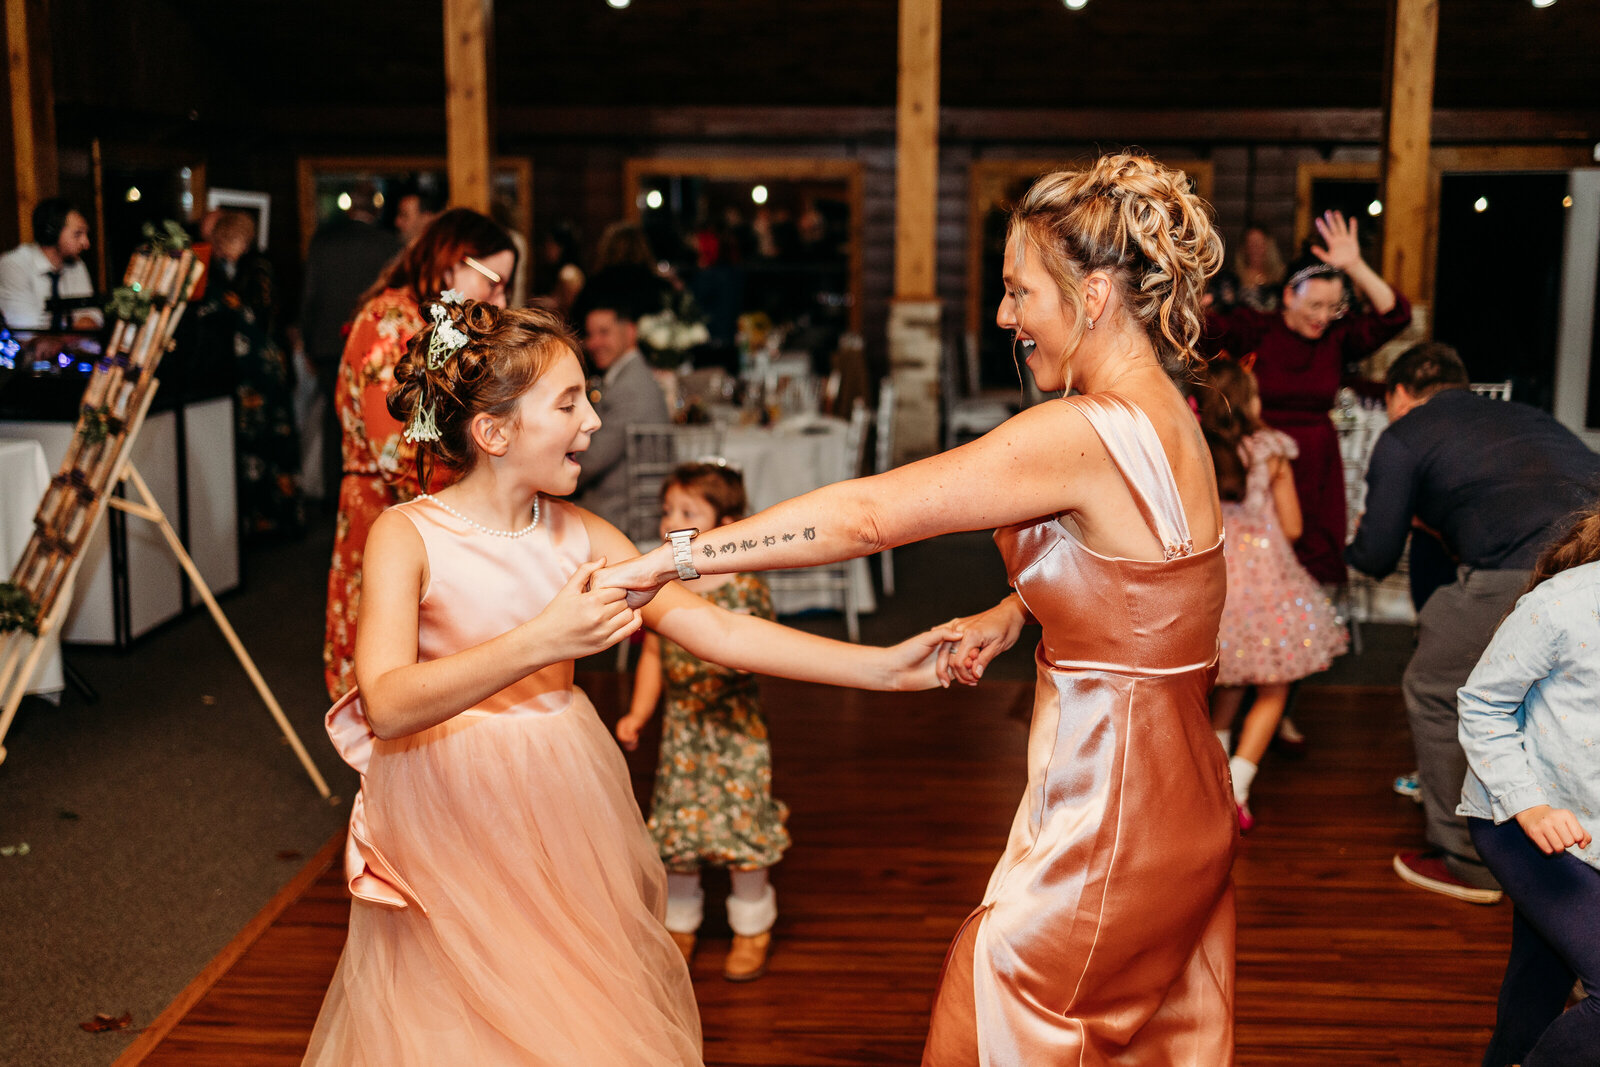 Mother and daughter dance to the music at a wedding reception